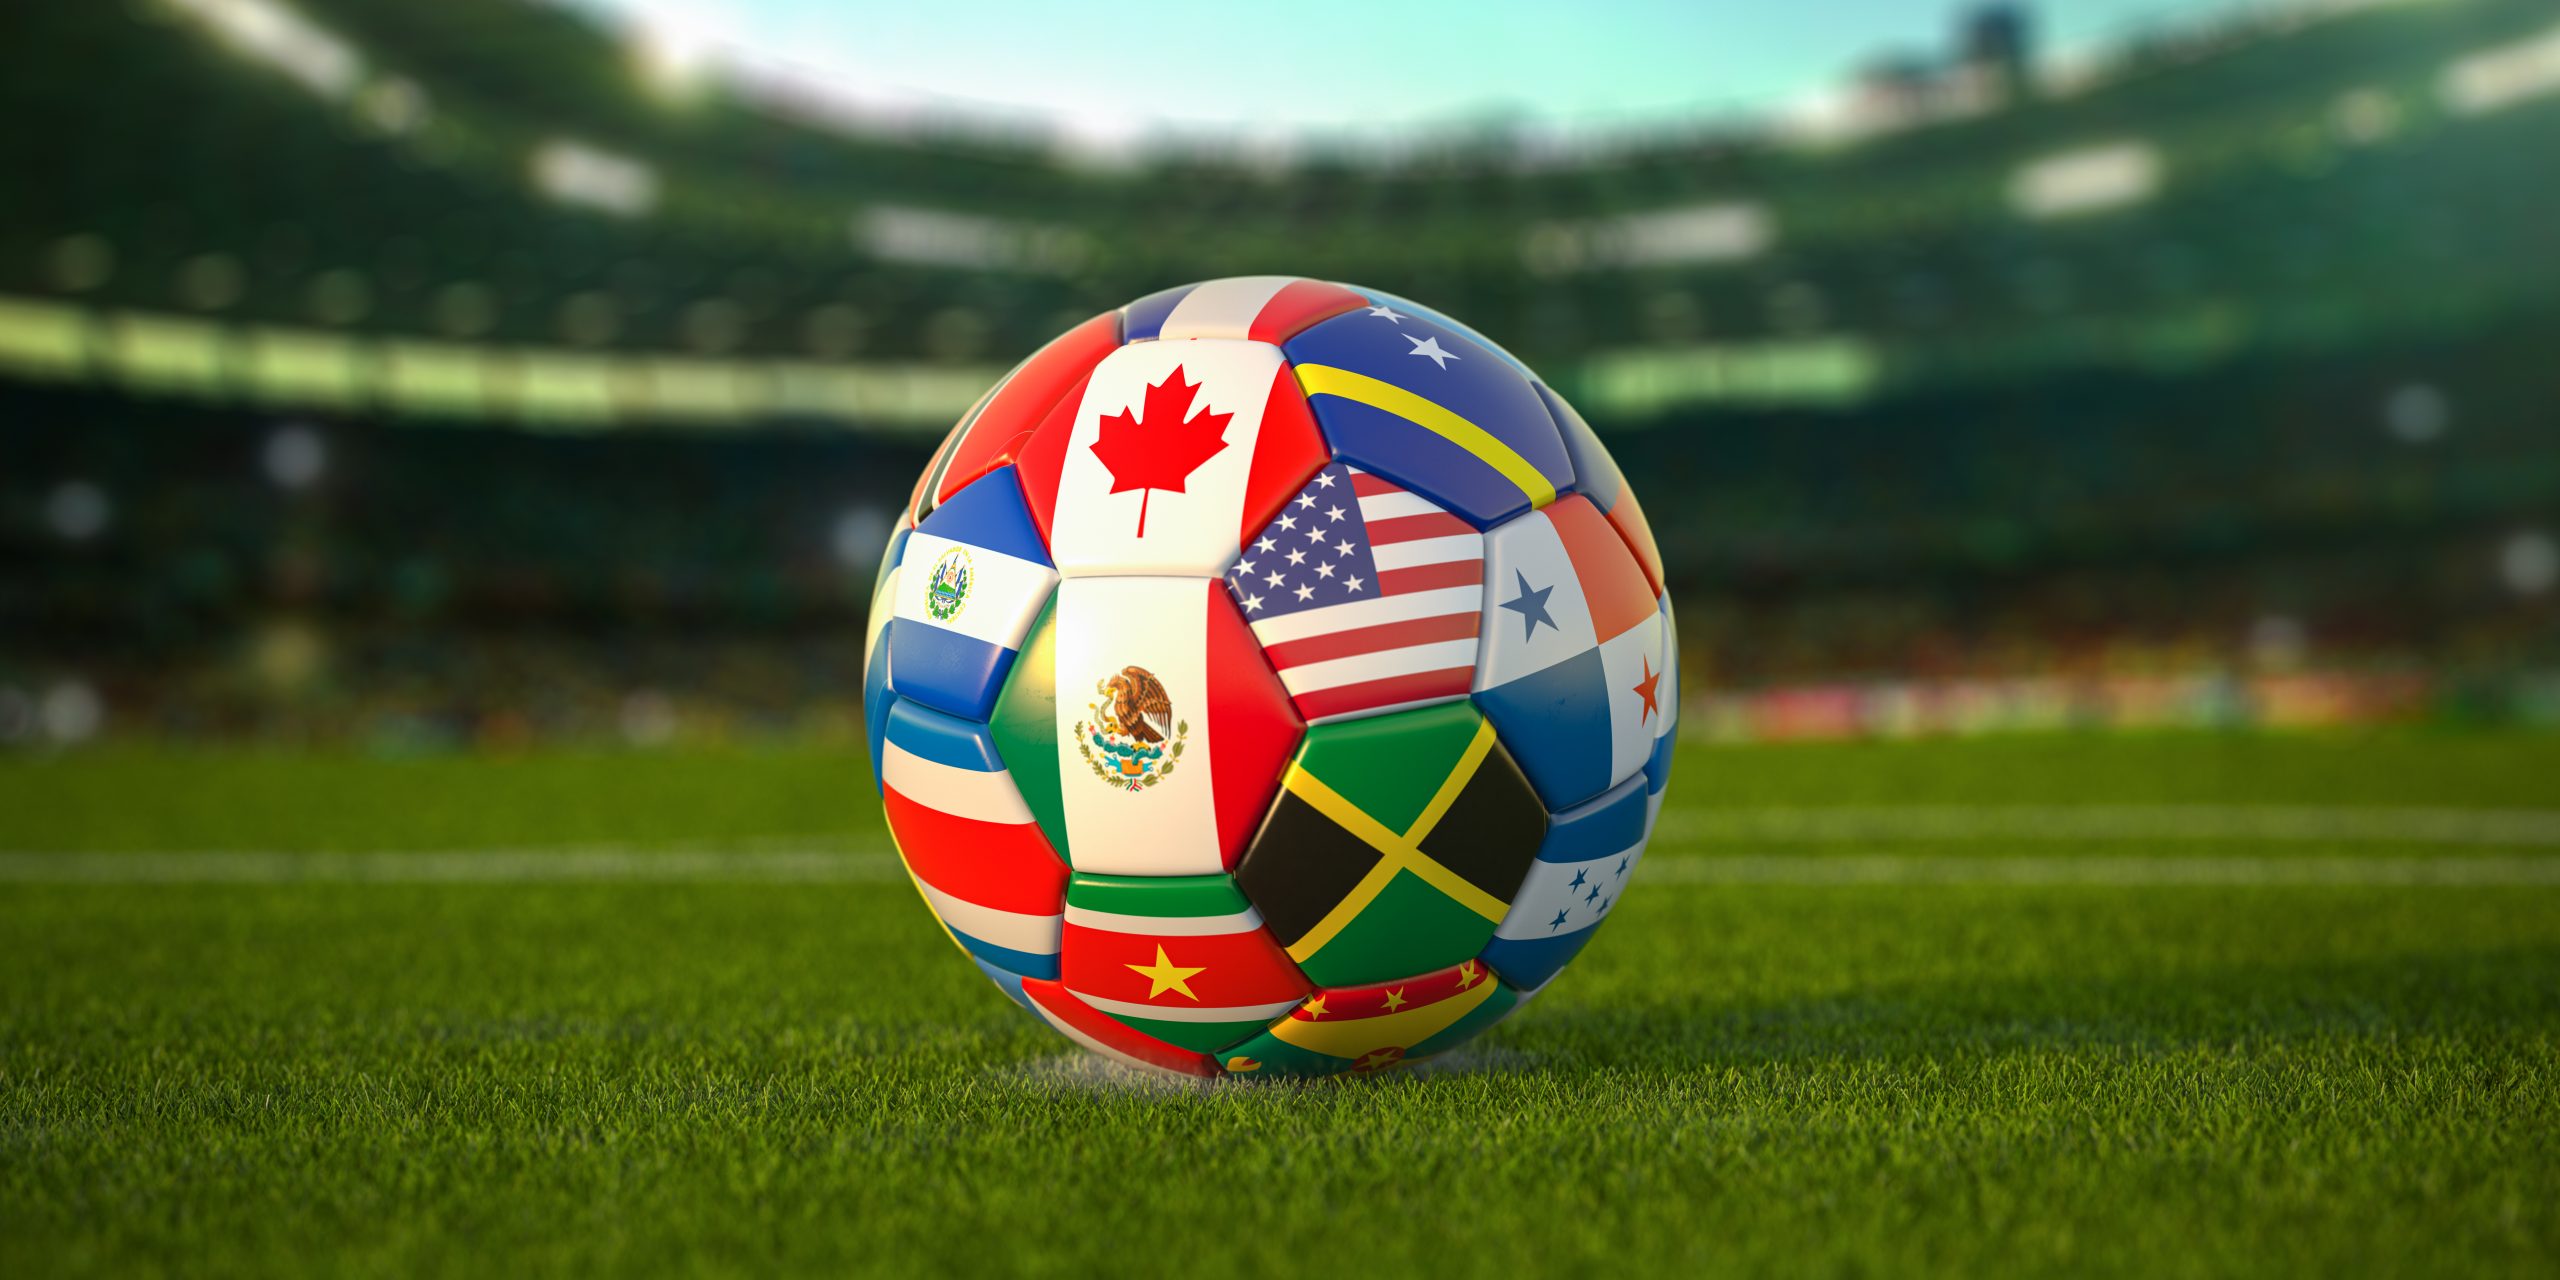 Soccer Football ball with Mexico flag and North America